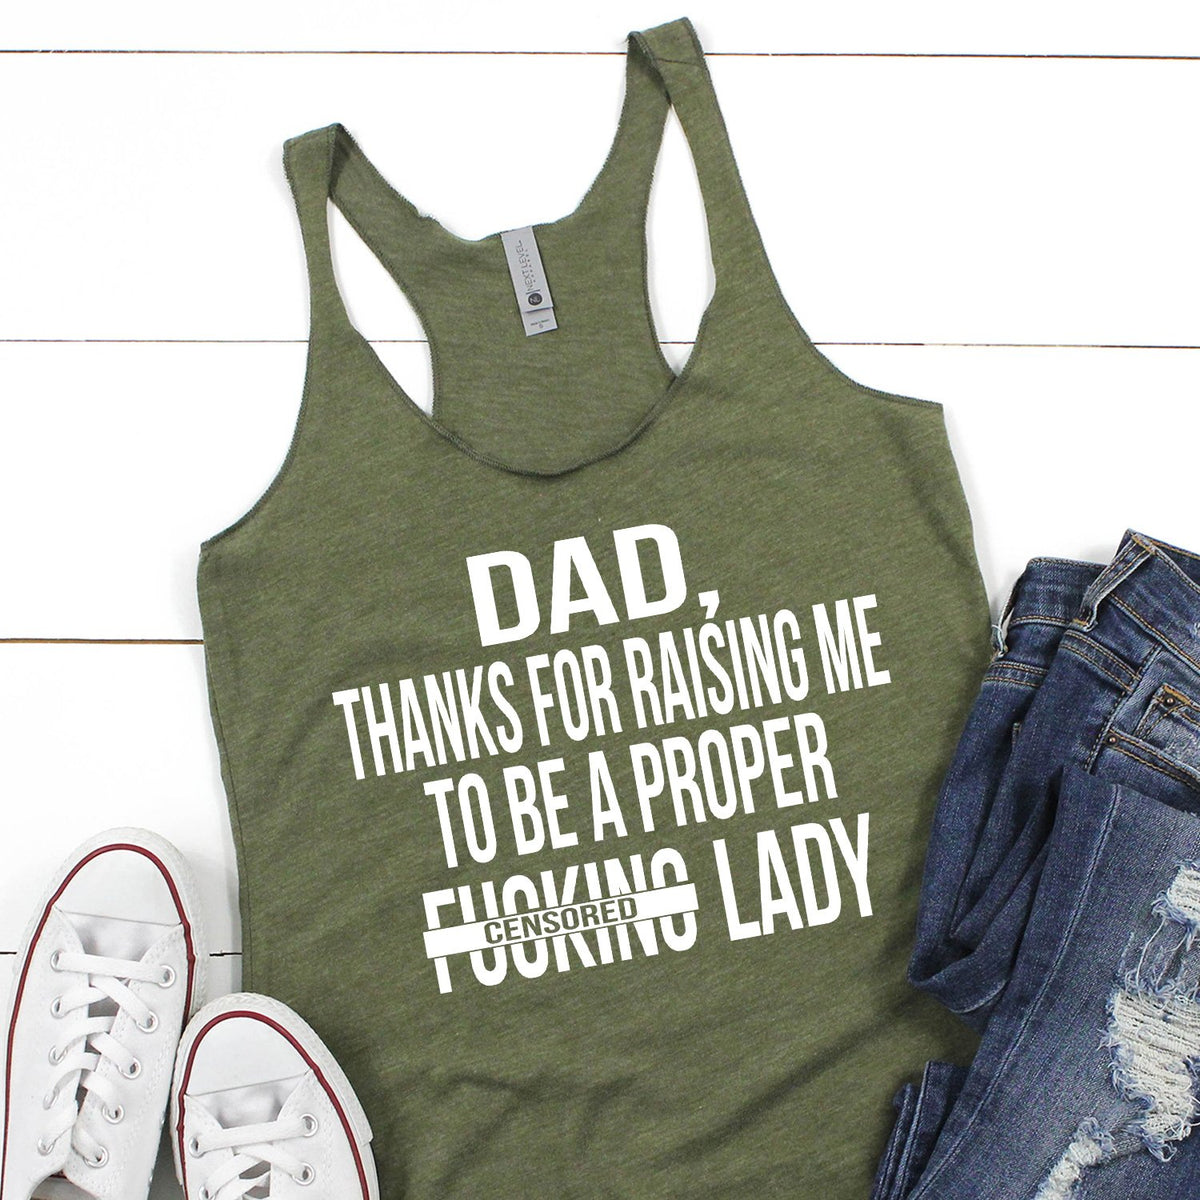 DAD Thanks For Raising Me To Be A Proper Fucking Lady - Tank Top Racerback